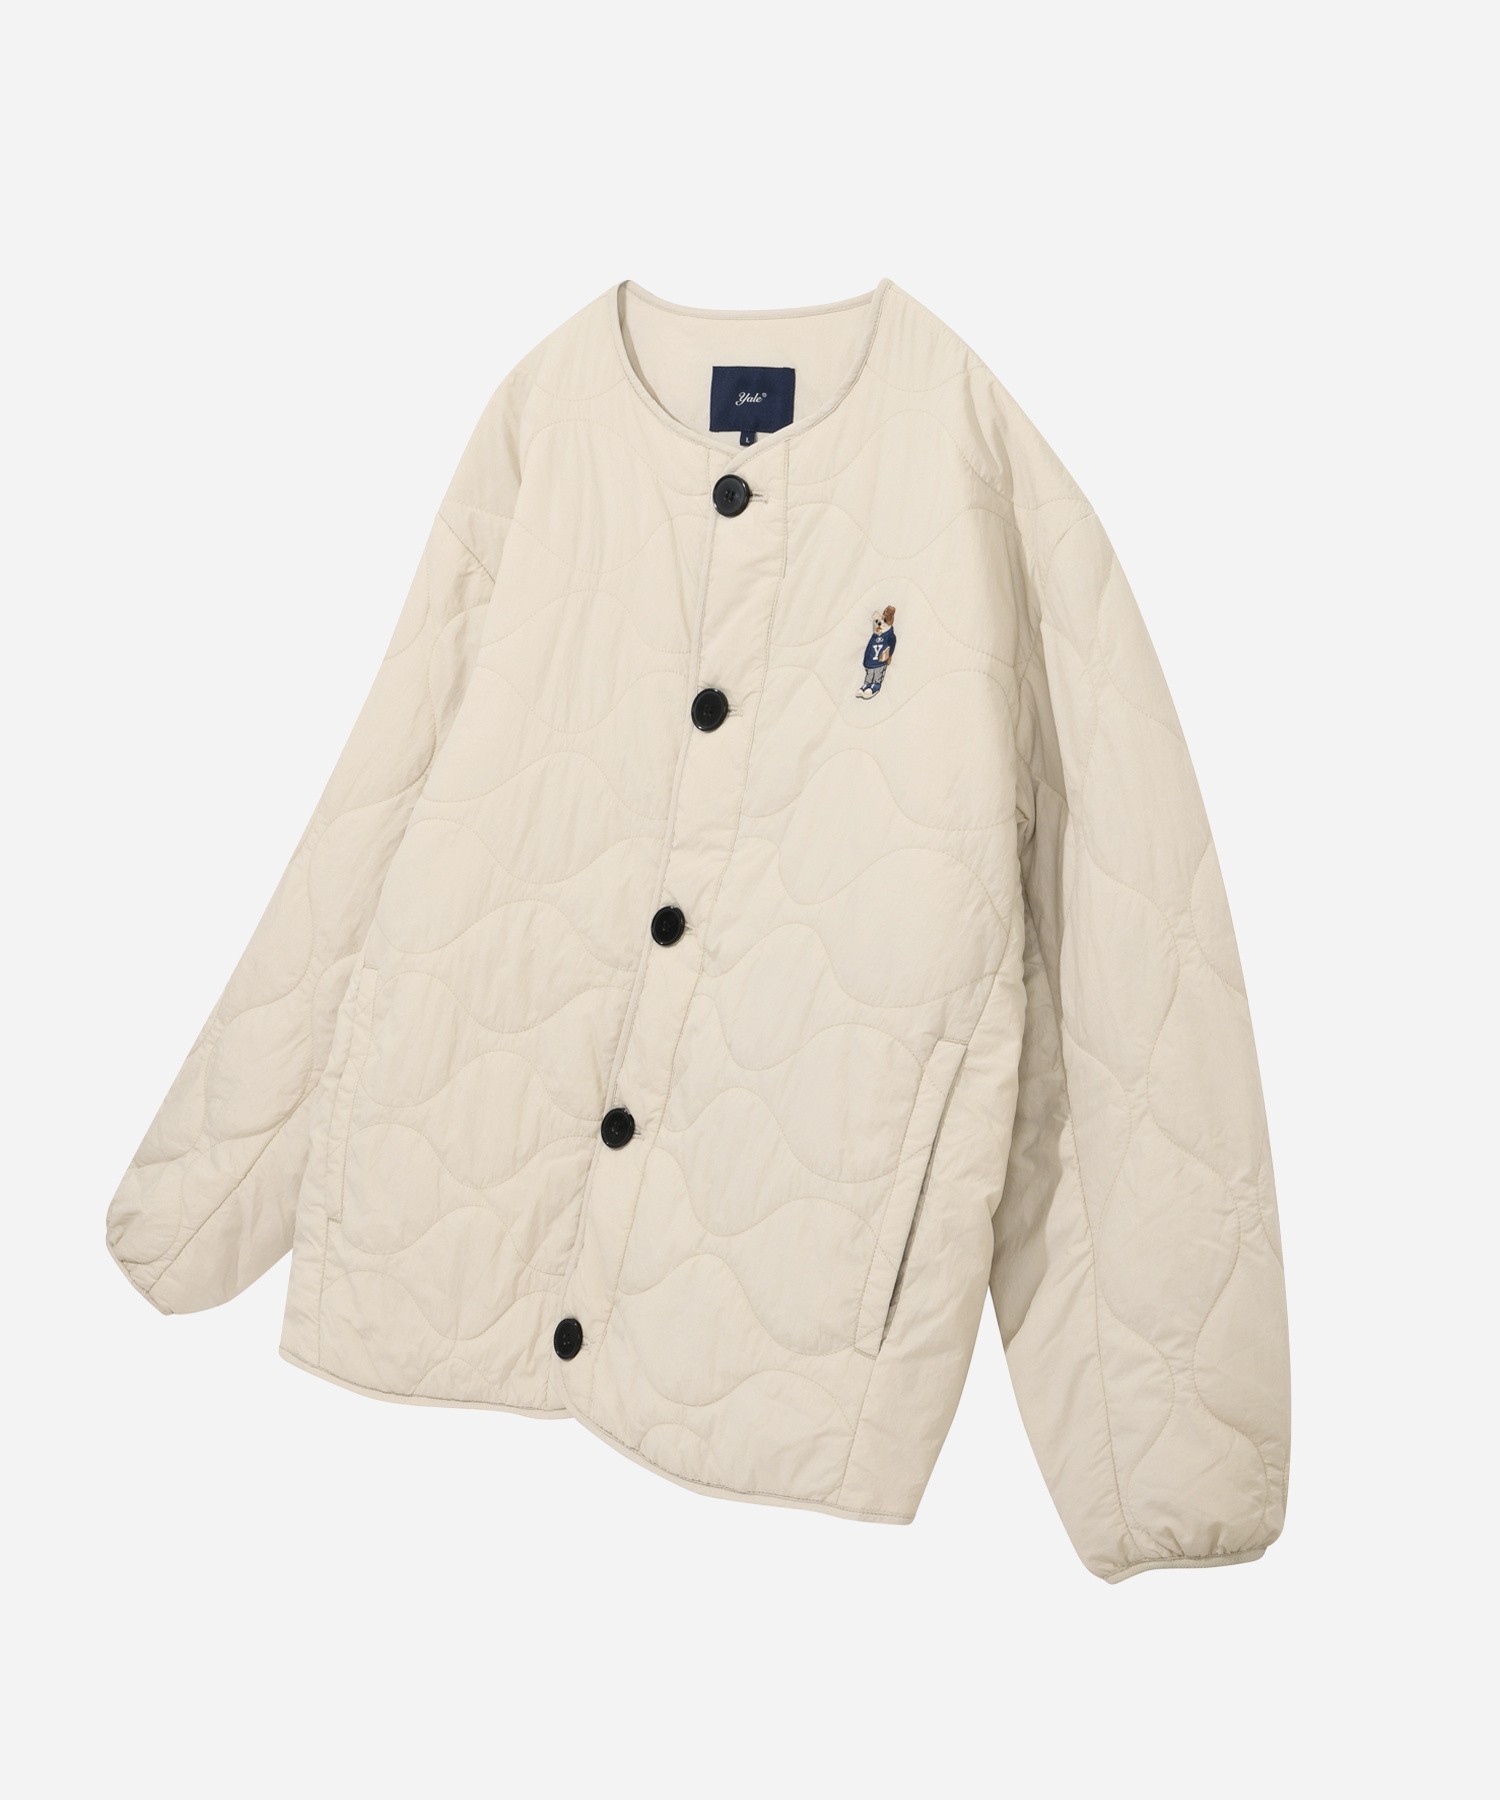 EMBROIDERY DAN COLLARLESS QUILTING JACKET IVORY